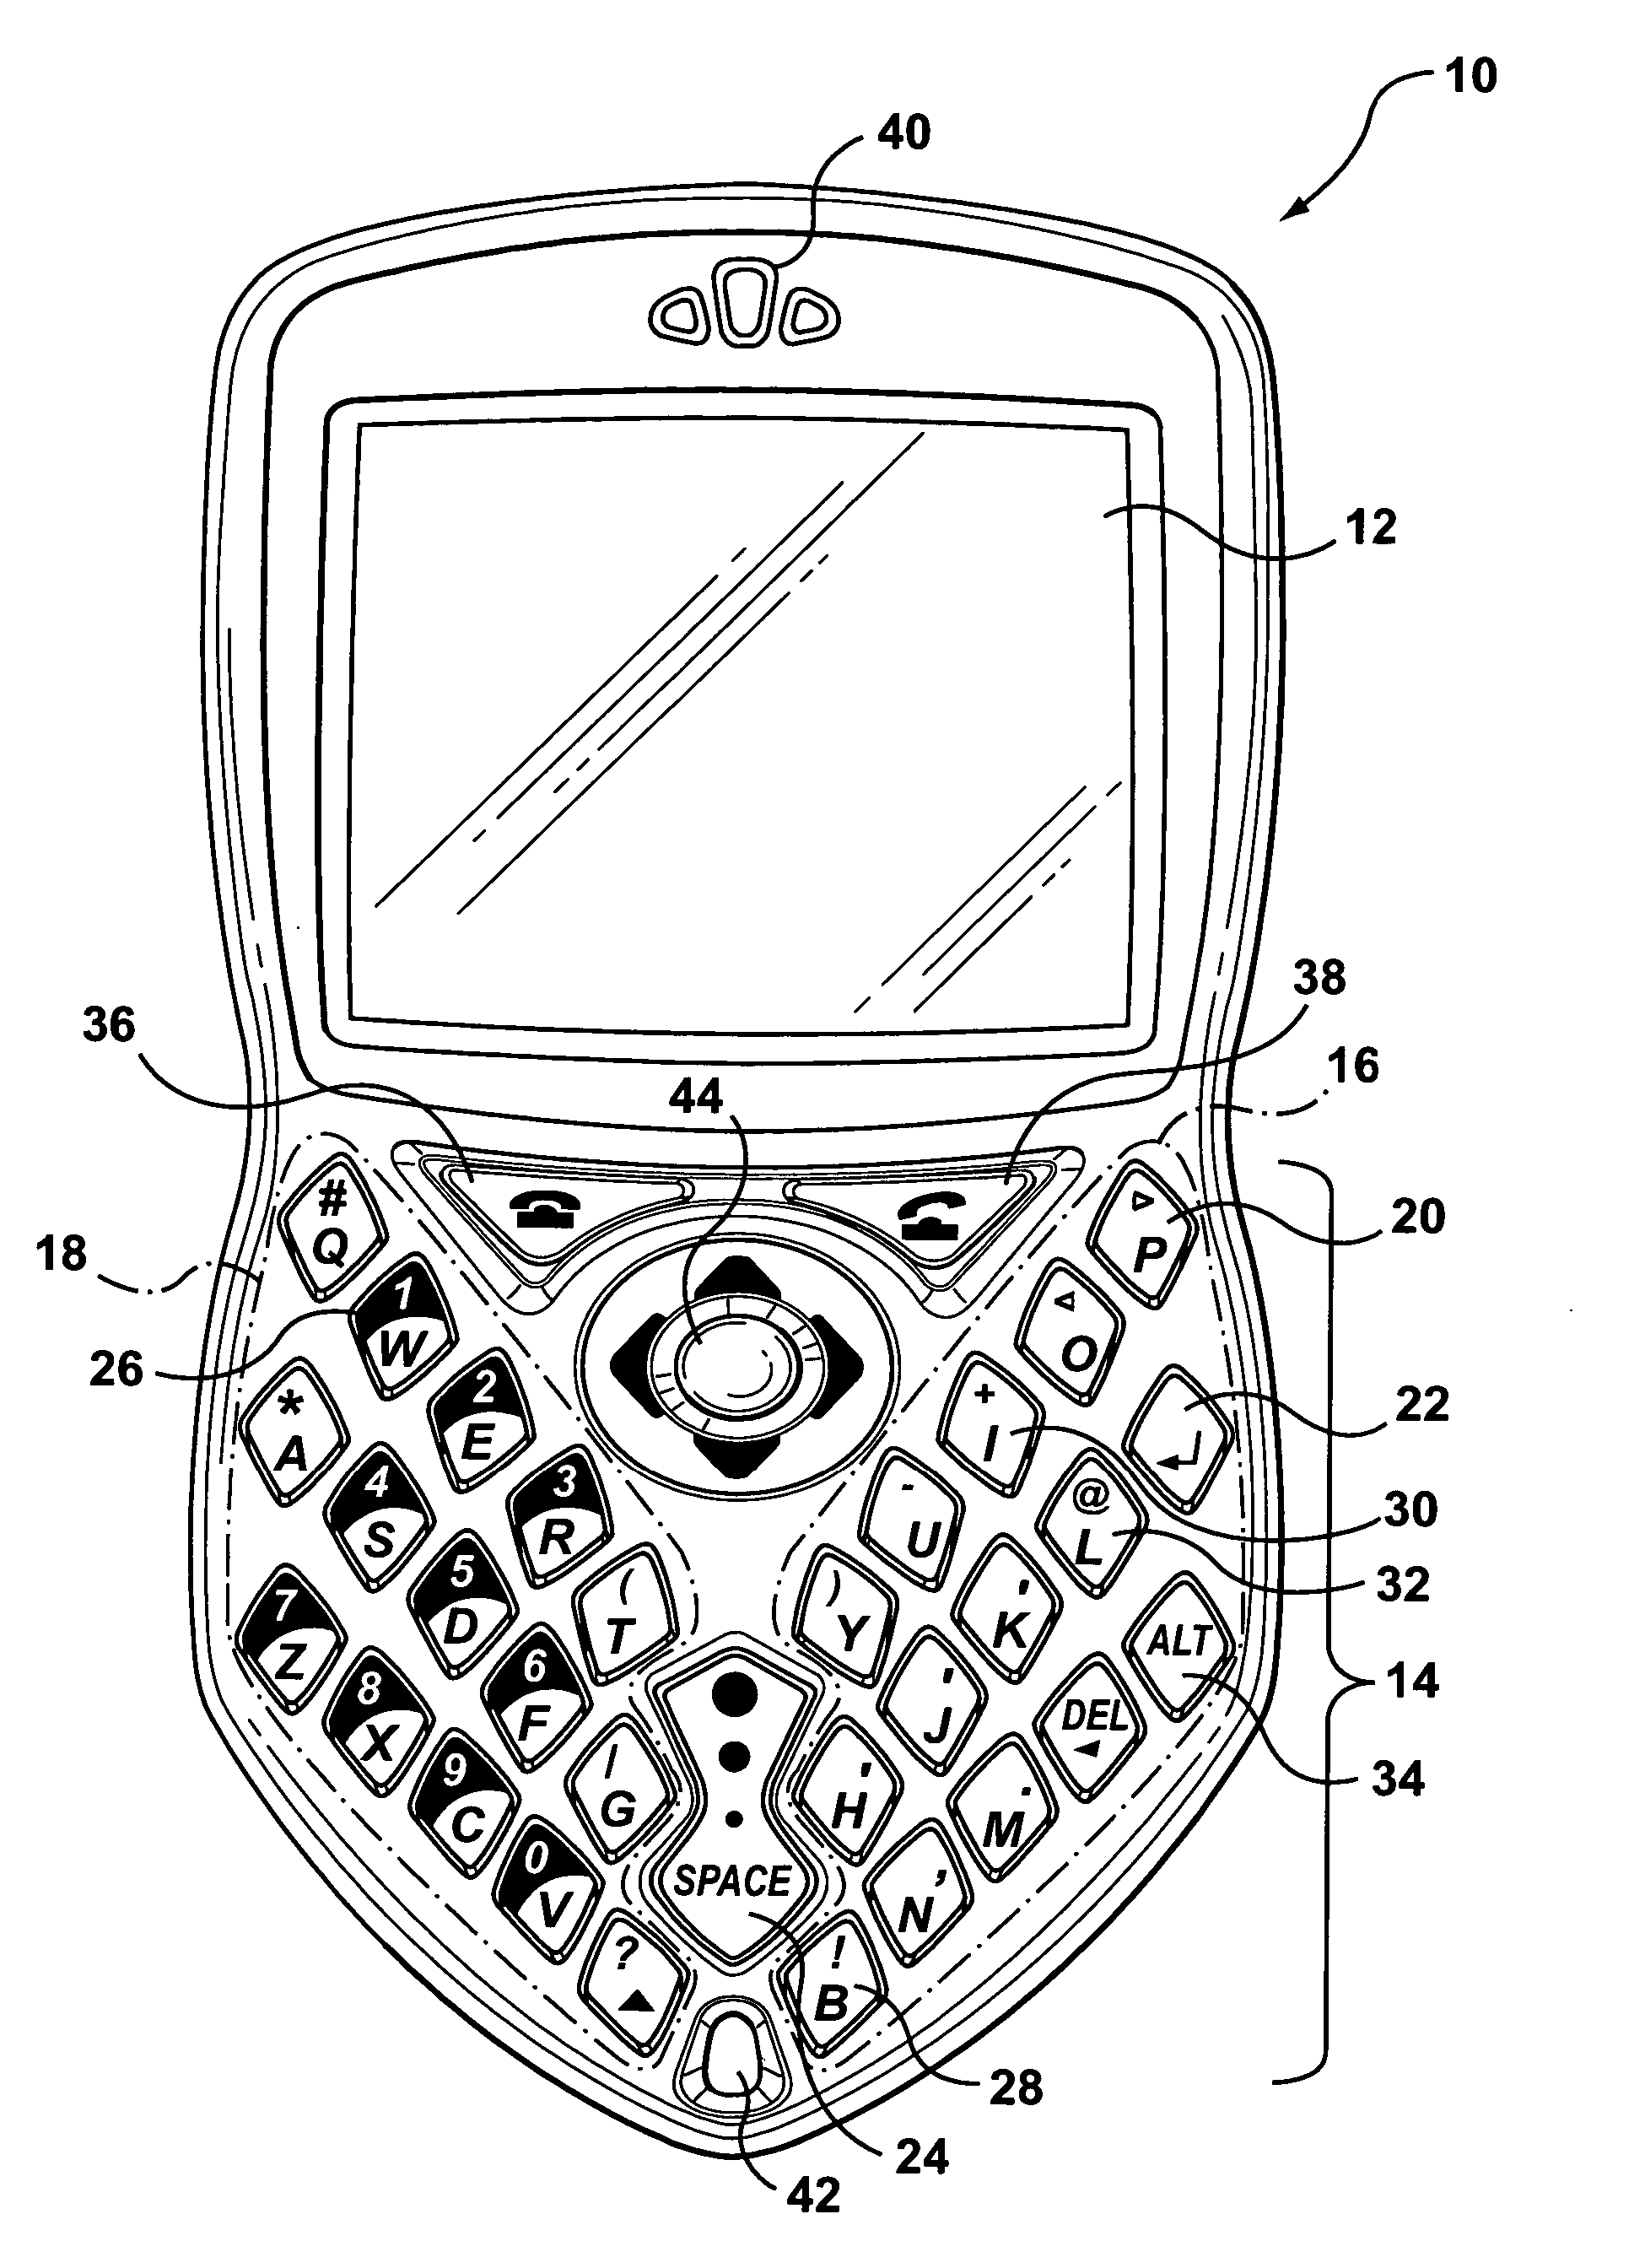 Keyboard arrangement for handheld electronic devices